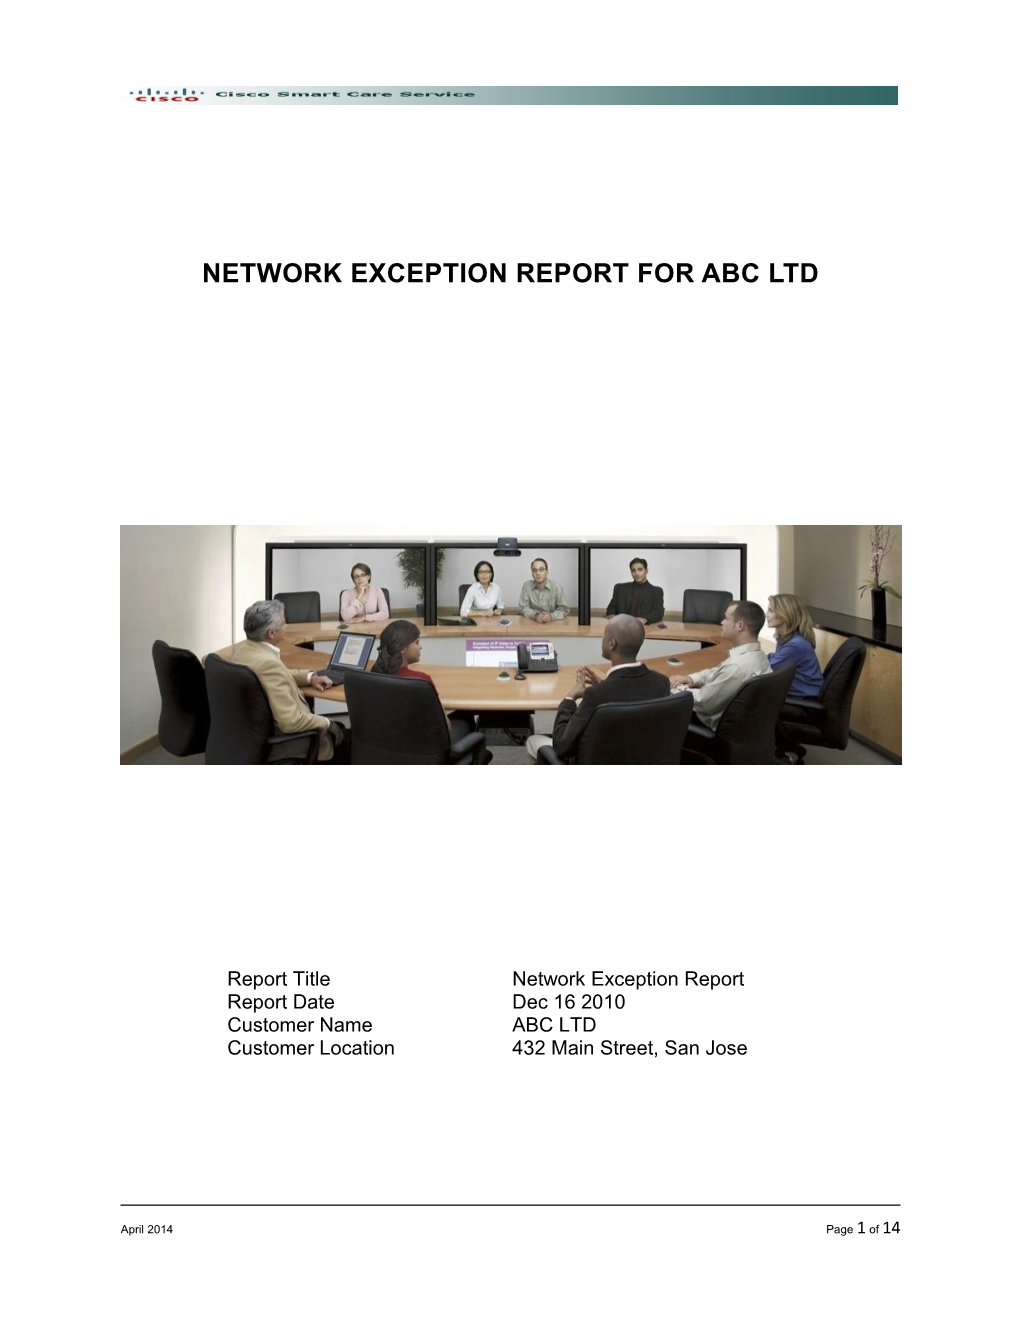 Network Exception Report for Abc Ltd